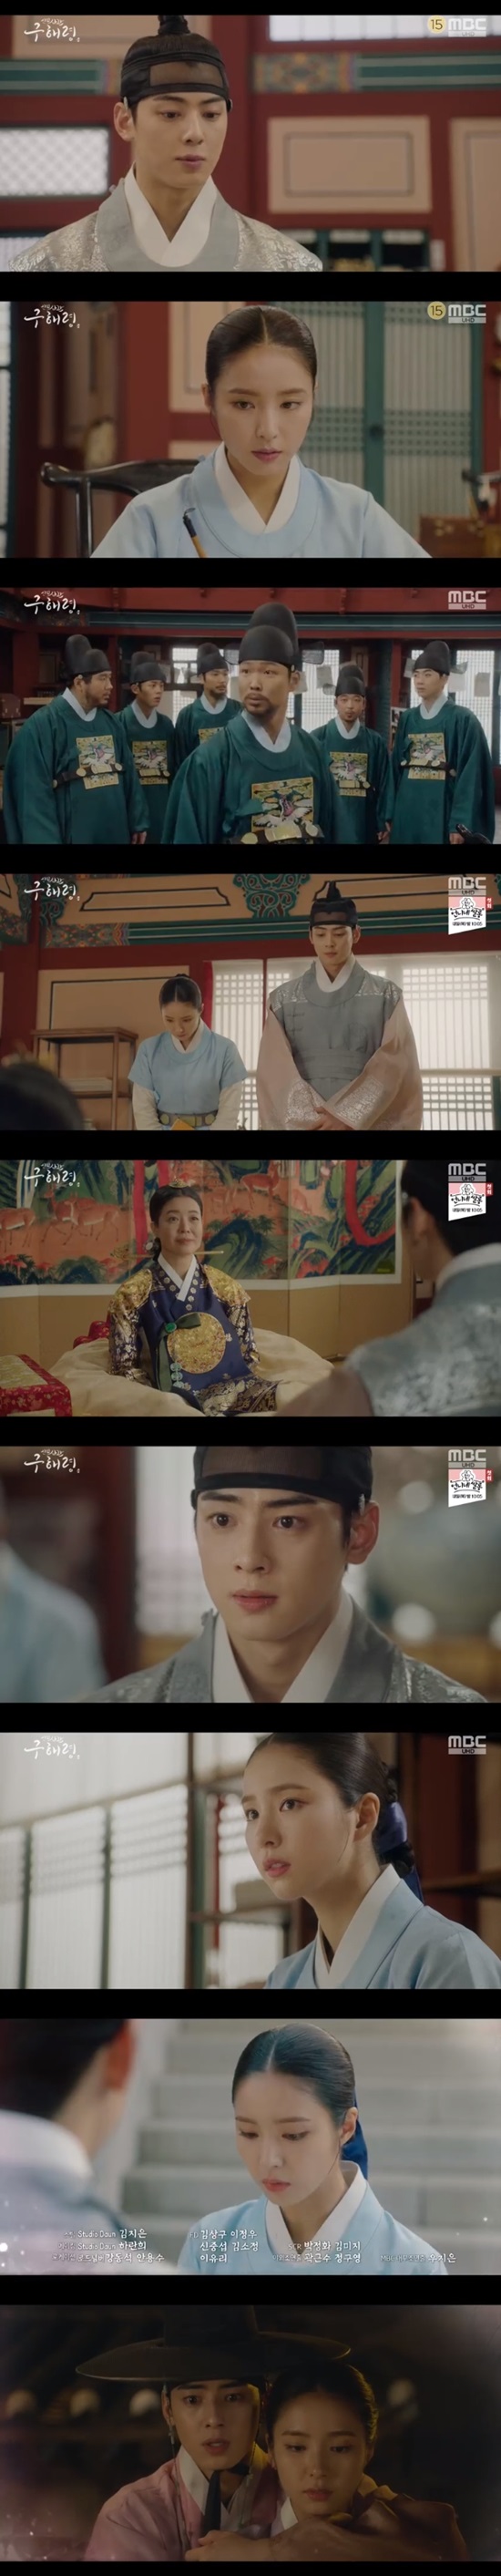 Cha Eun-woo and Shin Se-kyungs love hit new DangerIn the MBC drama Rookie Historian Goo Hae-ryung, which aired on September 4, 29-30 (playplayplay by Kim Ho-soo/directed by Kang Il-soo Han Hyun-hee), Sejo of Joseon Yirim (Cha Eun-woo) was appalled by the installation of the Garyecheong.Min Ik-pyeong (Choi Deok-moon) peeked through Song Sa-hee (Park Ji-hyun), the first lady, who had few Rookie Historian Goo Hae-ryung (Shin Se-kyung).Min-pyeong told Lee, who had hidden the kings transfer, You were also wrong from birth.Even if you live in a Sejo of Joseon clothes and pretend to be a Sejo of Joseon, you cant help it.Min Ik-pyeong then met the king and promoted the marriage of Irim.The king (Kim Min-sang) set up a ritual service while Lee Rim and Rookie Historian Goo Hae-ryung continued their sweet love affair.The king intended to marry Irim and send him out to Candy Crush Saga, and Im (Kim Yeo-jin) agreed to proceed with the marriage of Irim even though he knew his plan.Instead, Im decided to take the pair of Irim directly.Another Danger, Lee Rim and Rookie Historian Goo Hae-ryung, who had just been caught in a secret relationship with other female ministers Oh Eun-im (Lee Ye-rim) Hea-ran (Jang Yu-bin), came to another Danger.Rookie Historian Goo Hae-ryung, knowing that, told Irim, I am reducing it, didnt you want to go to Candy Crush Saga for a long time?What the hell are you reducing? Irim said, Im so absurd. I didnt want you to go out like this. Dont worry too much. Im not going to marry anyone else.If you are in the same mind as me, but Rookie Historian Goo Hae-ryung said, What if it is the same mind?I should live as a wife in the rites for the rest of my life in return for that.I do not have to do anything to do with it, Min said to those who were in charge of the ritual.I have already chosen the right person. I went to the guest house and told Rookie Historian Goo Hae-ryung, Do you have to take your hand with me? He revealed to other officers the identity of Sejo of Joseon. ...Irim said, I came to give you a blue. Take the house and stop my marriage. I already have a GLOW in mind.I do not want anyone other than GLOW because I am so deeply in love with it. Yoo Gyeong-sang